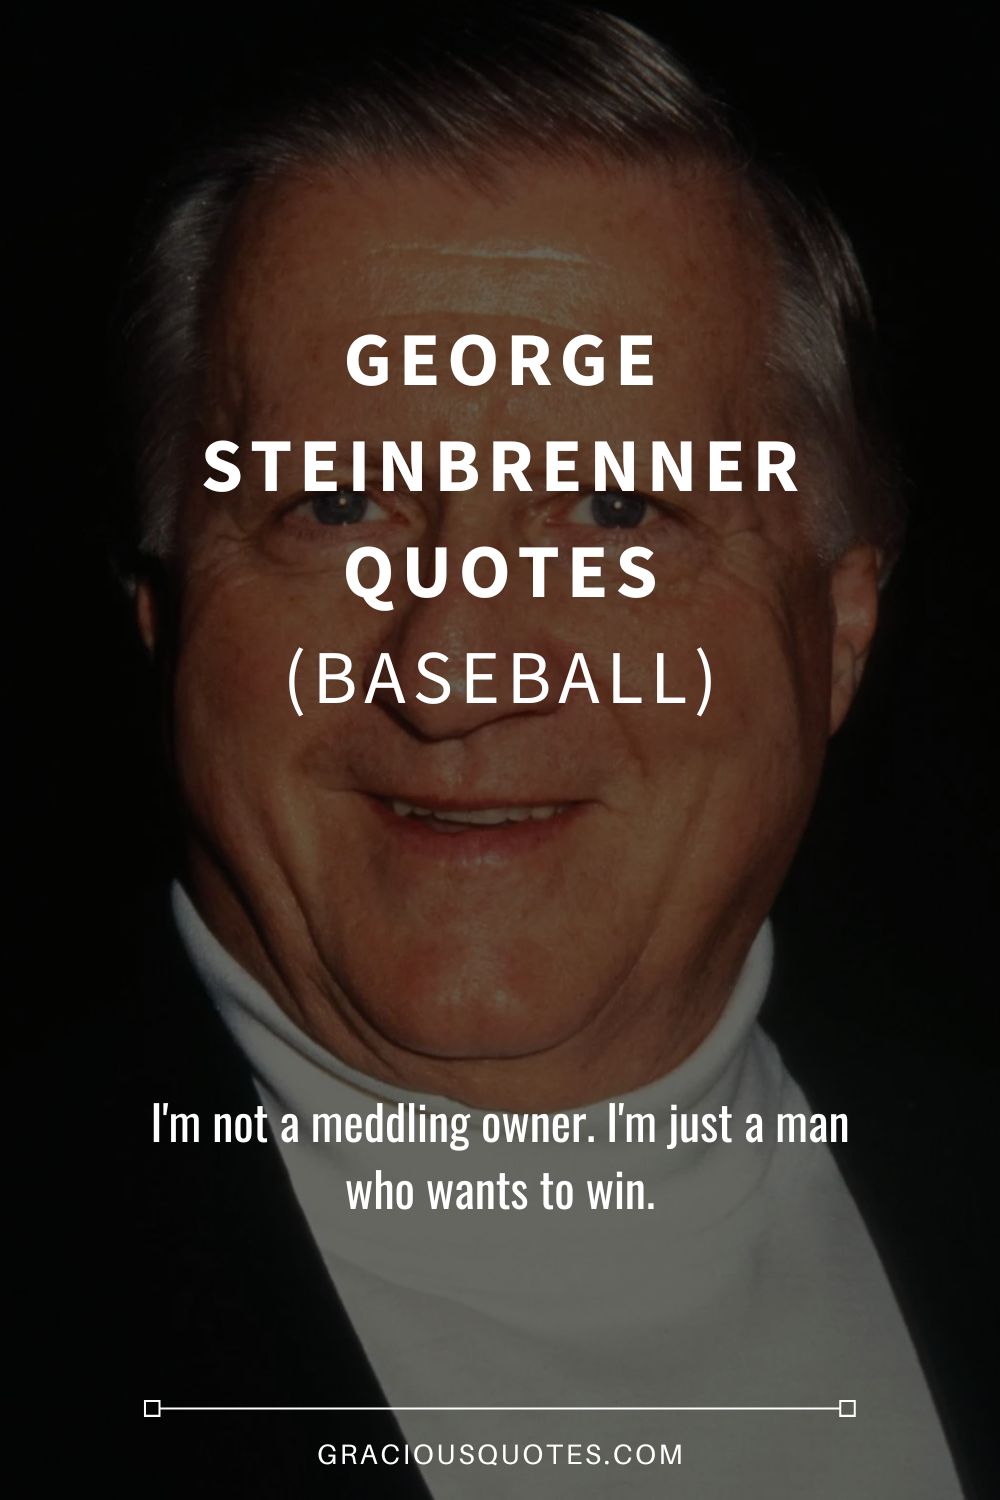 George Steinbrenner Quotes (BASEBALL) - Gracious Quotes